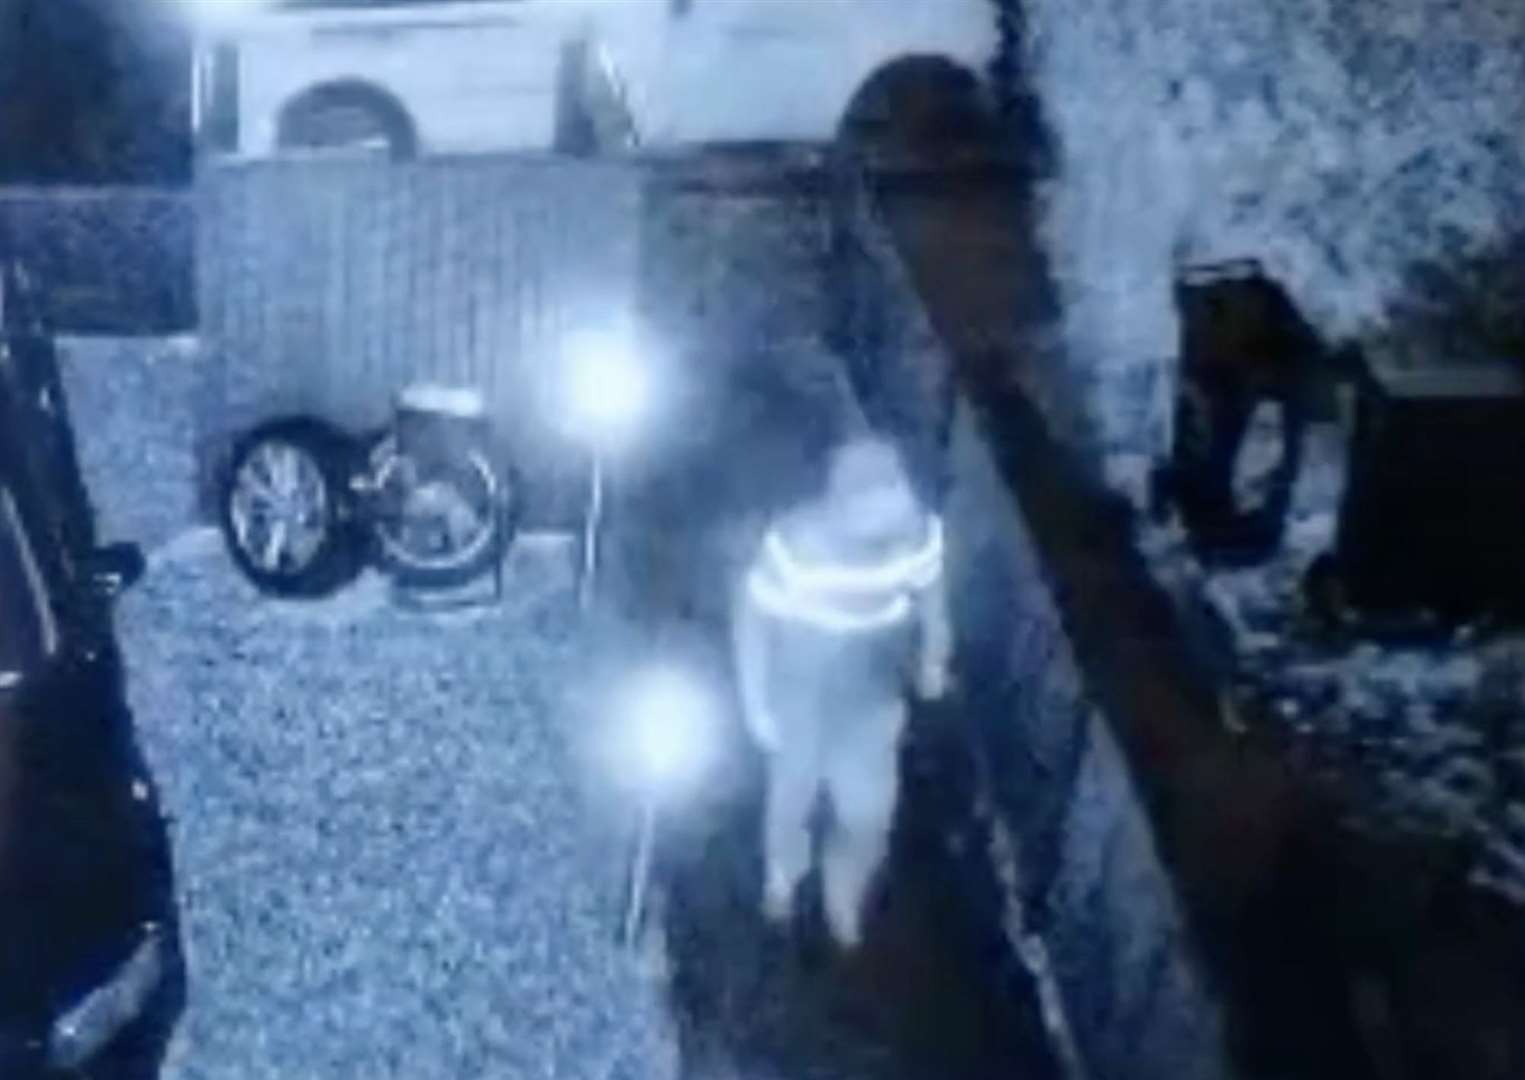 The man was seen stealing a moped from a front garden in Margate. Picture: Tarnya Louise